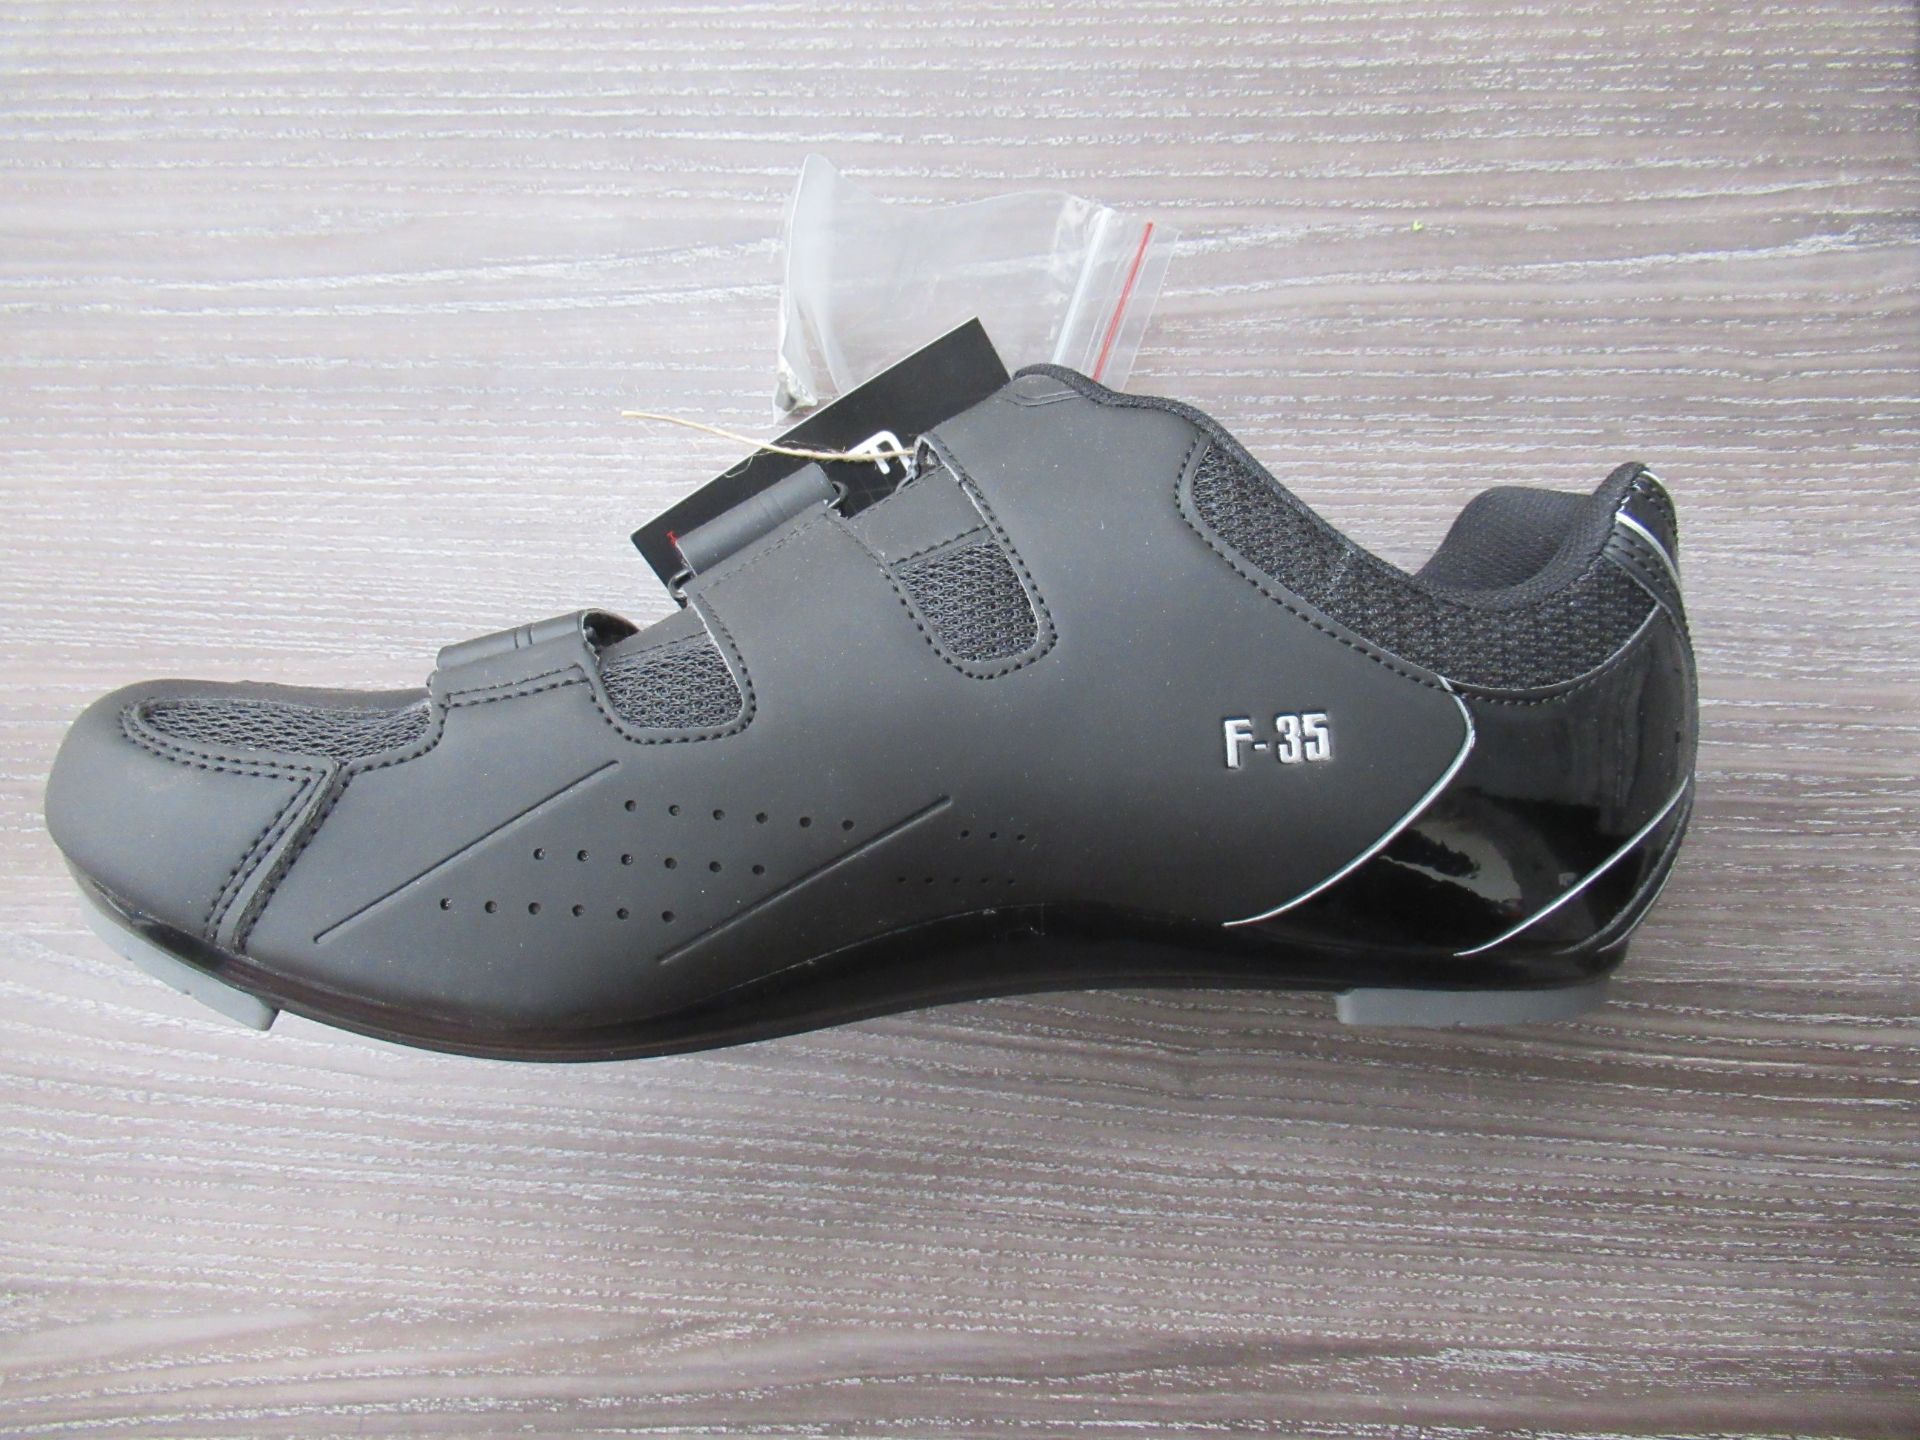 2 x Pairs of FLR cycling shoes - 1 x F-35 III boxed EU size 45 (RRP££64.99) and 1 x F-15 III boxed E - Image 4 of 7